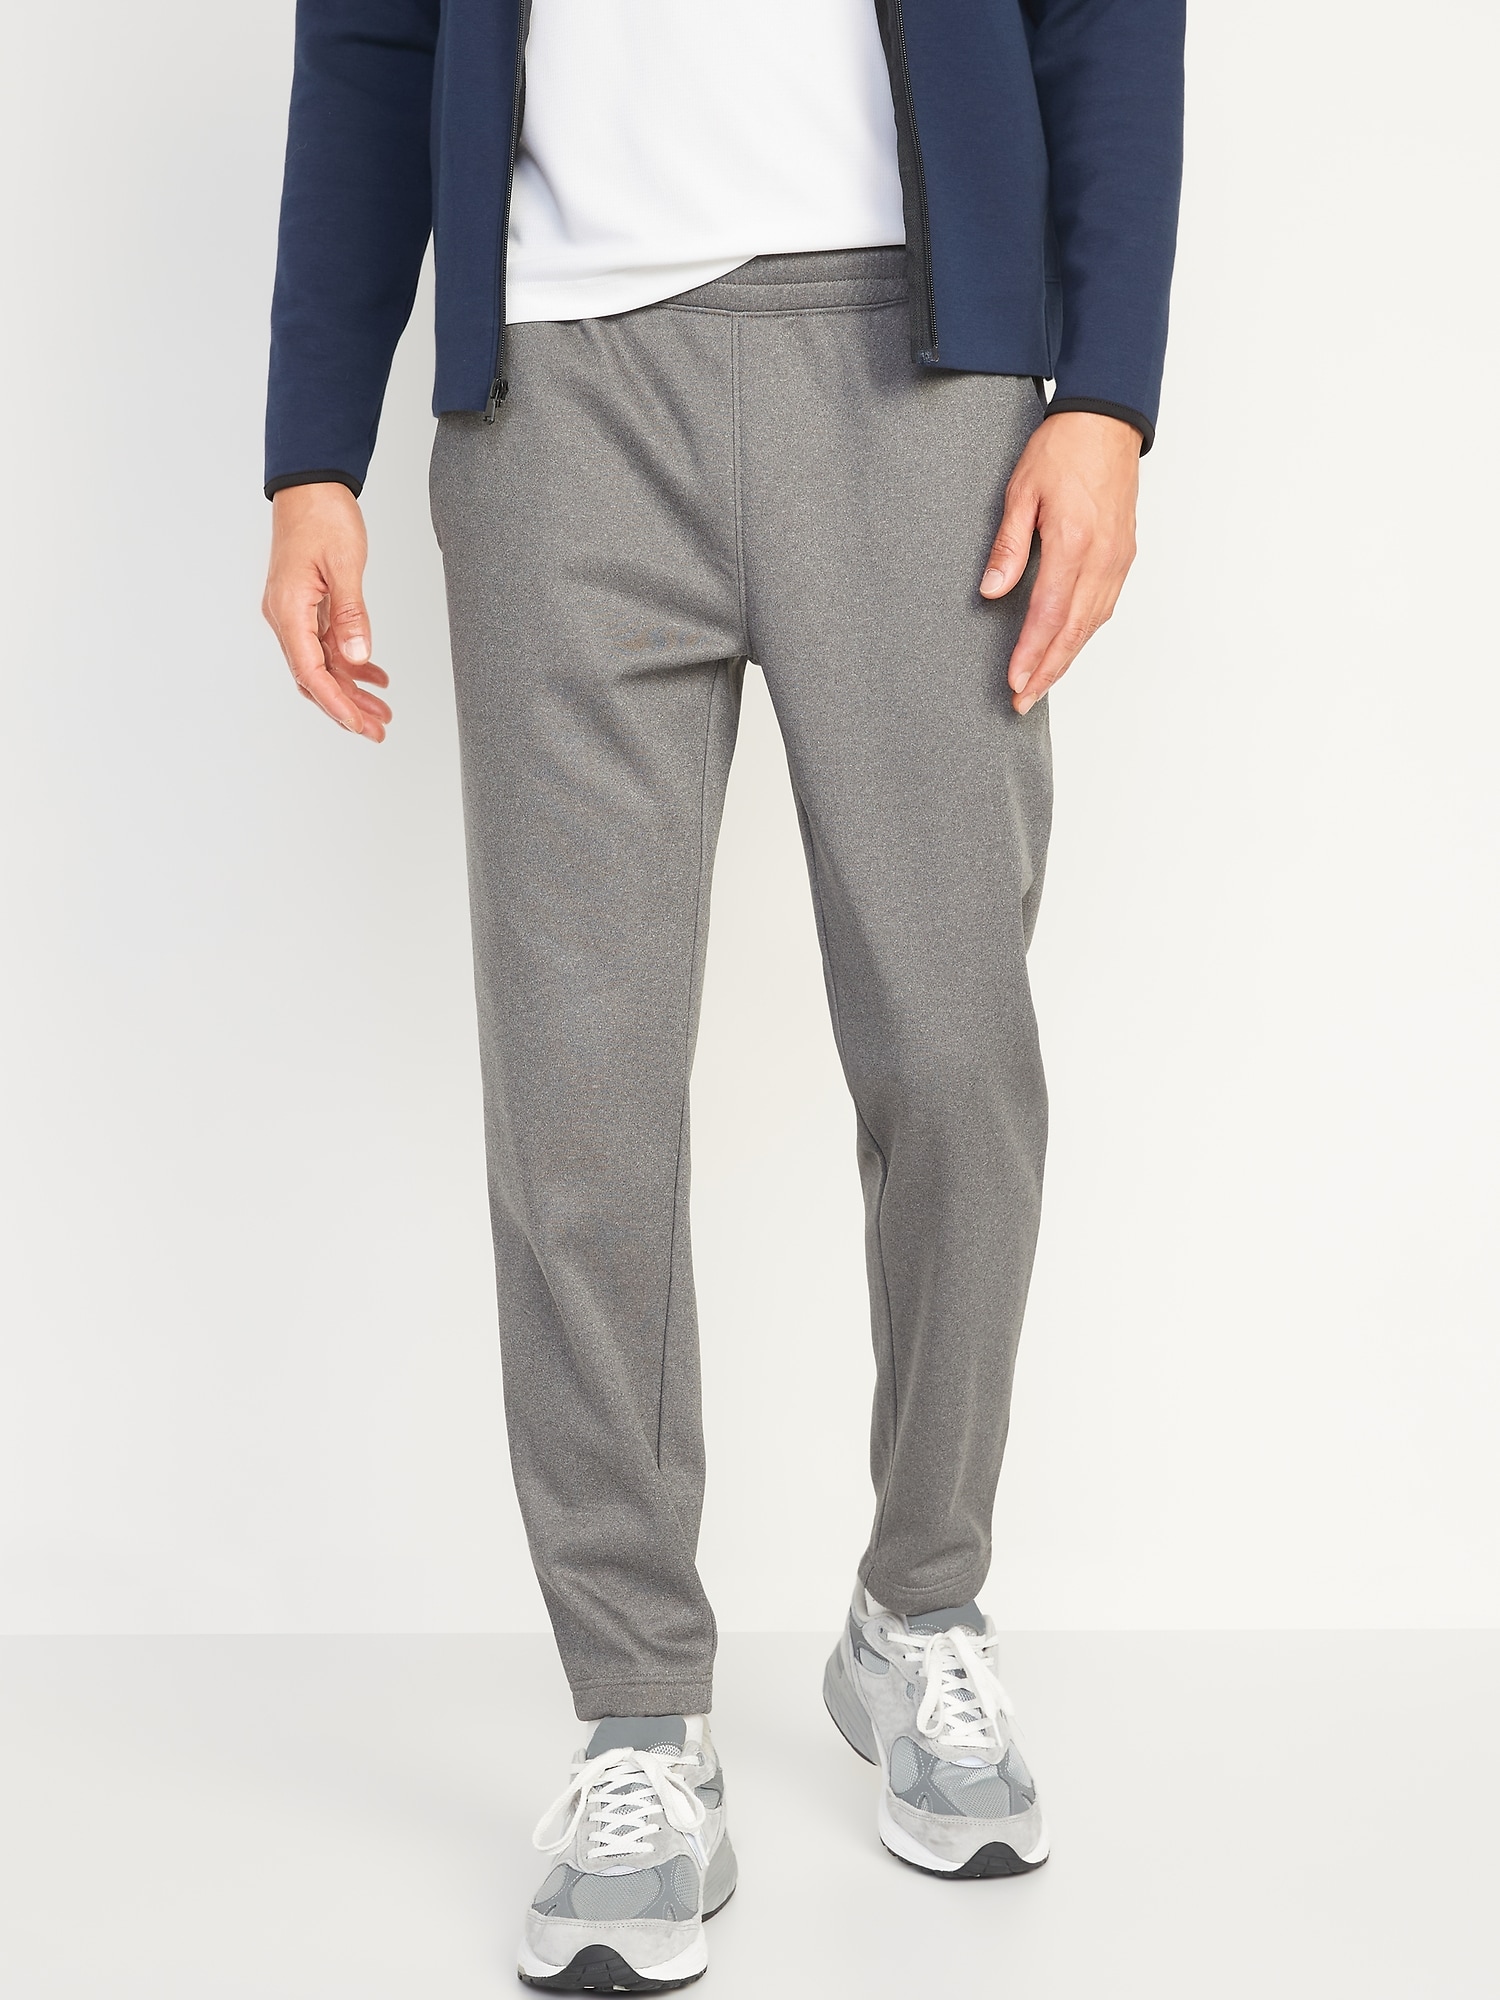 Go-Dry Performance Tapered Sweatpants